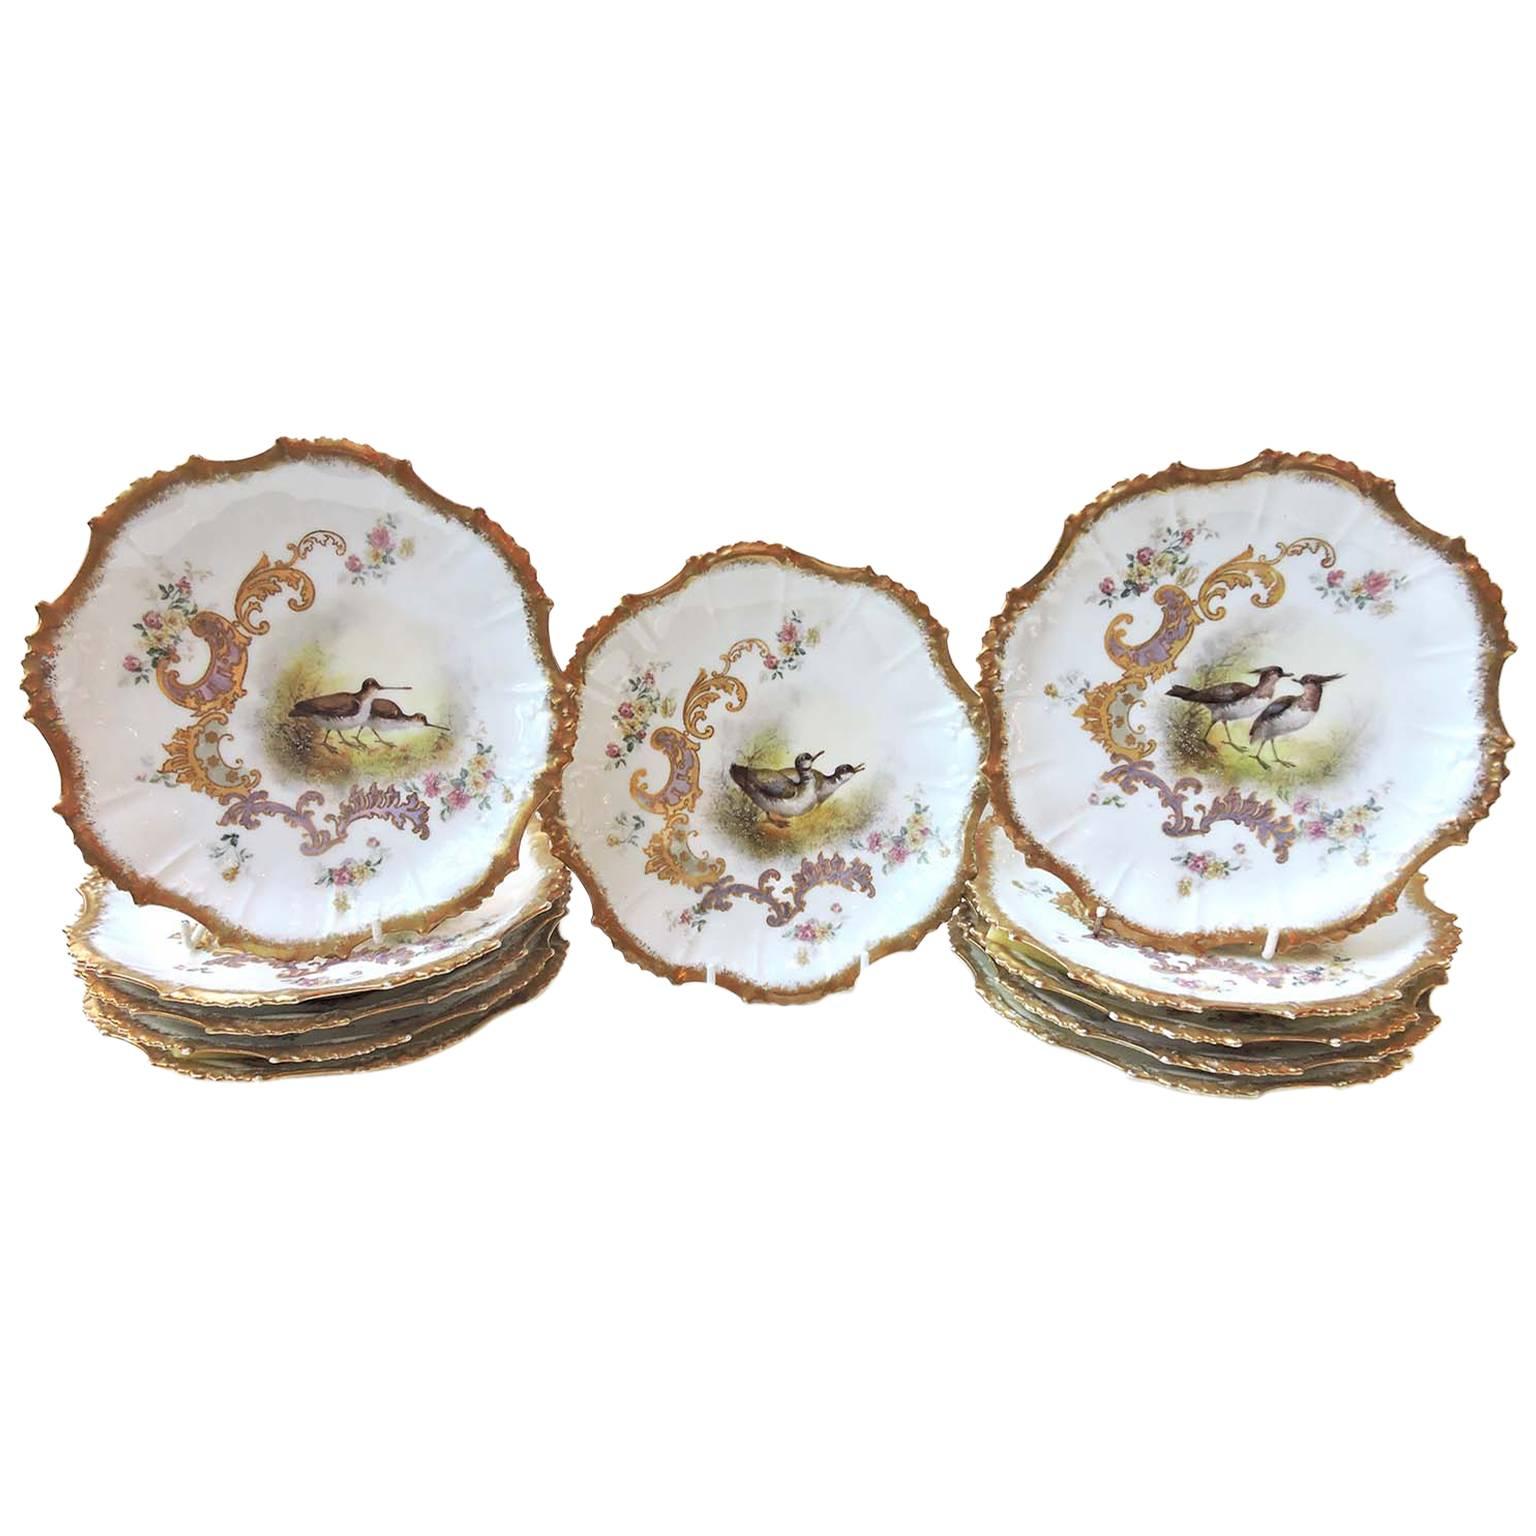 Set of 11 Limoges Plates Hand-Painted with Game Birds